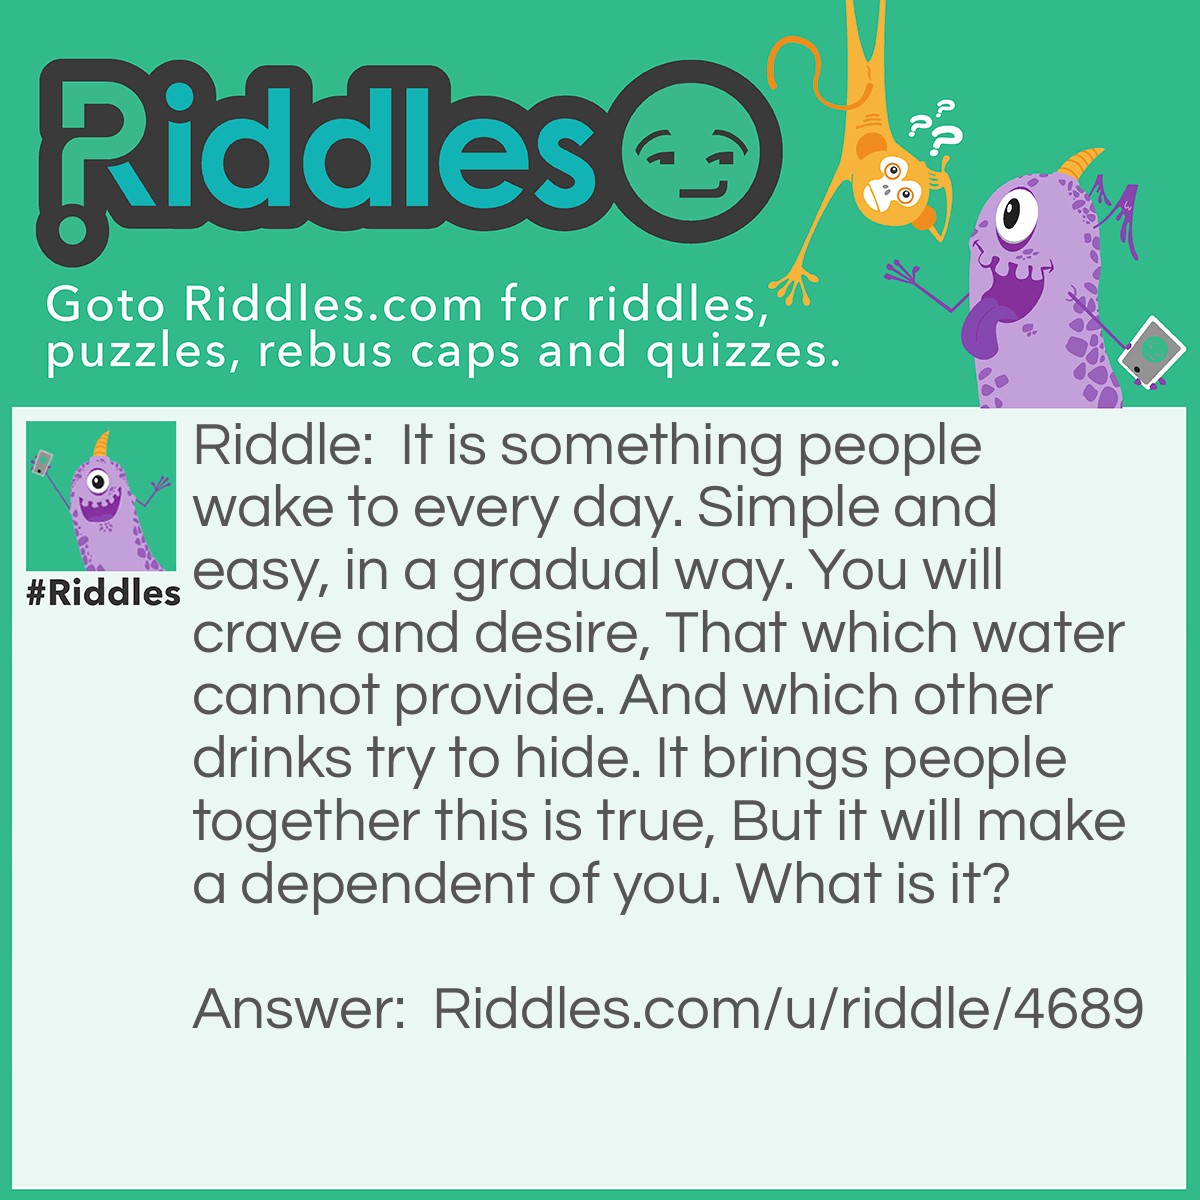 Riddle: It is something people wake to every day. Simple and easy, in a gradual way. You will crave and desire, That which water cannot provide. And which other drinks try to hide. It brings people together this is true, But it will make a dependent of you. What is it? Answer: Coffee/Caffeine.